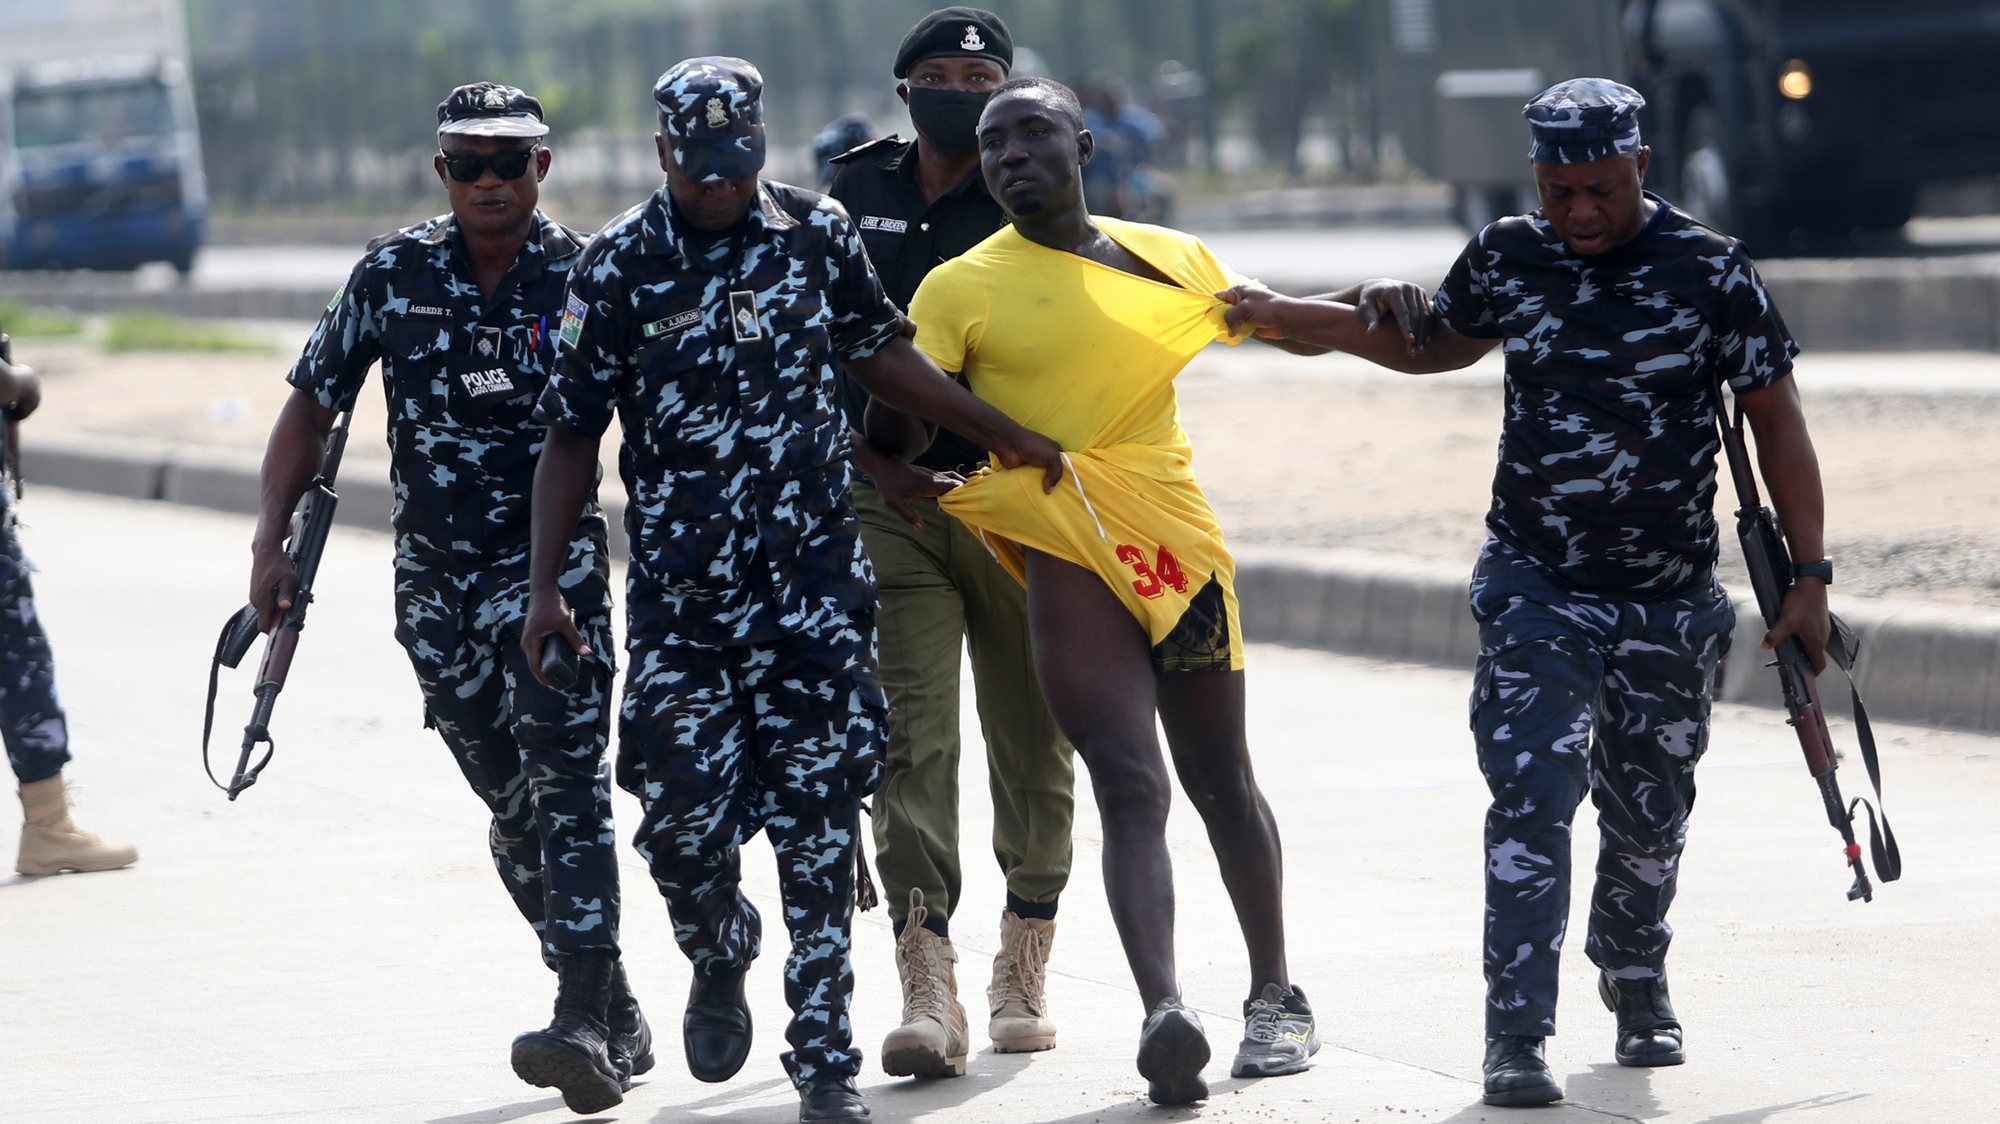 epa09264364 Policemen arrest a protester during a civil protest in the Ojota district of Lagos, Nigeria, 12 June 2021. Security operatives including the police and army personnel fired several shots of live ammunition and tear gas canisters into the air in a bid to disperse protesters demanding justice and end to bad governance in Nigeria. Activists called for protests on Democracy Day, which commemorates countryâ€™s move from military to elected civilian government in 1999.  EPA/AKINTUNDE AKINLEYE